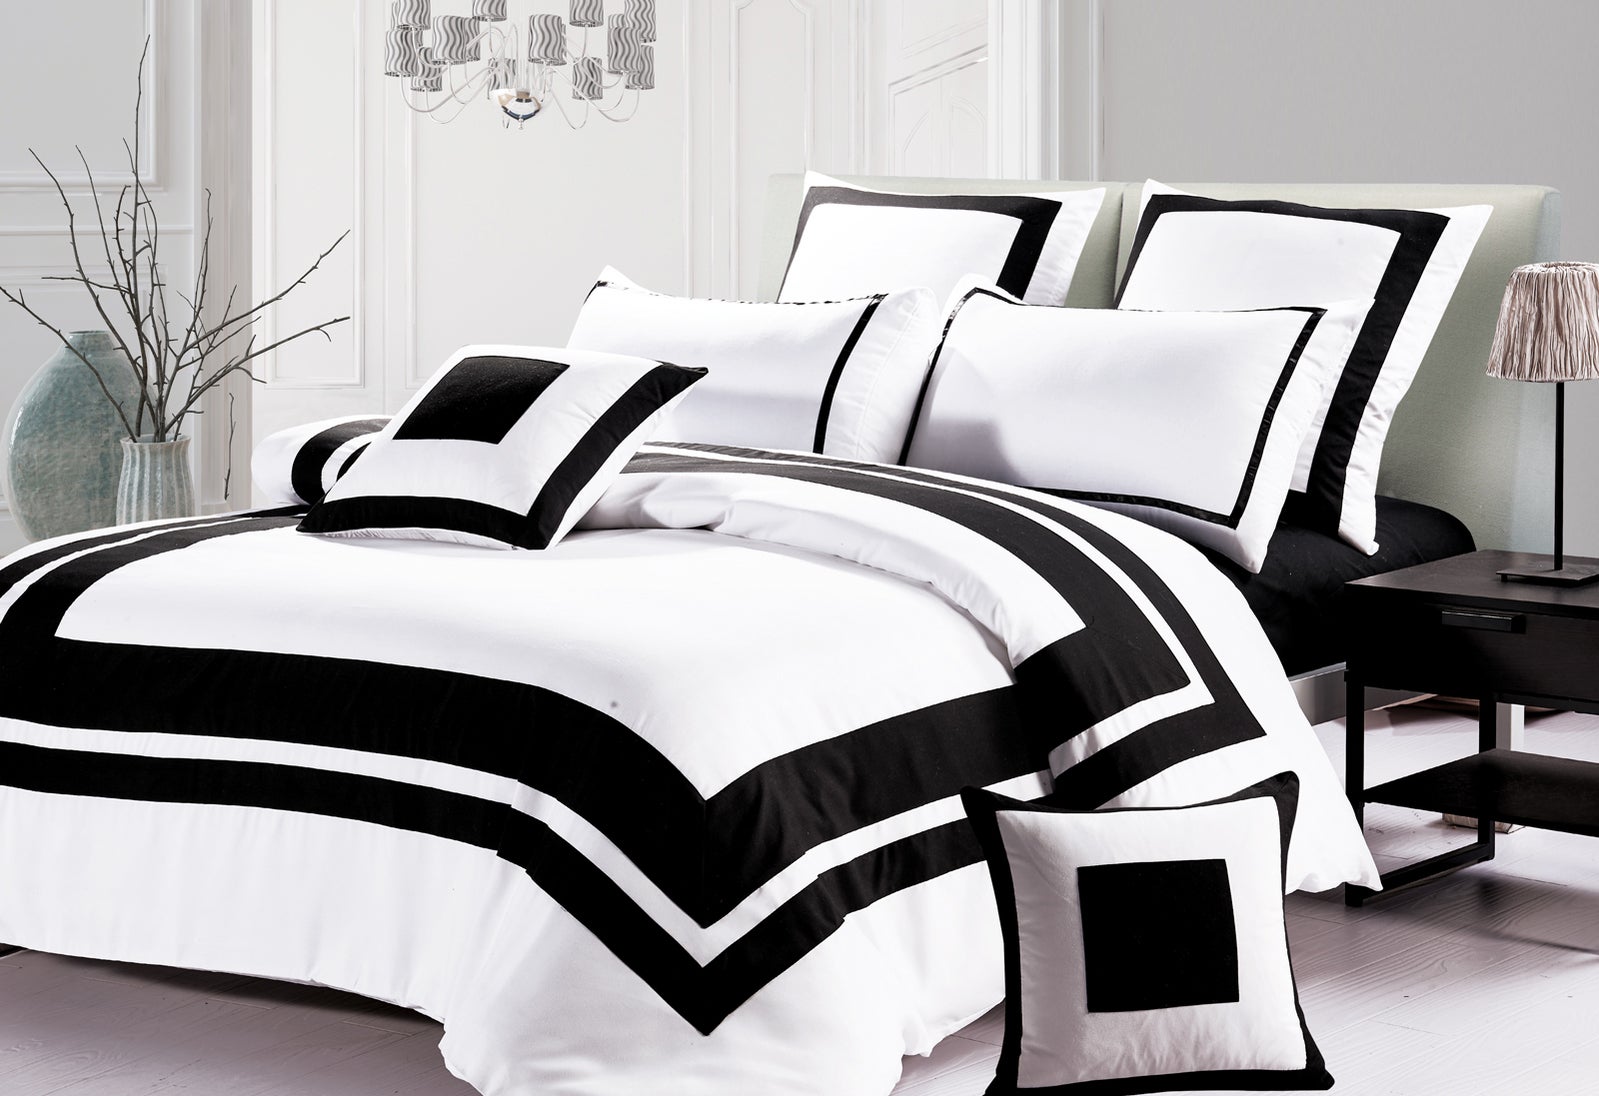 Luxton Abel Hotel Style Black White Quilt Cover Set /Optionals ( Queen / King / Super King size / Options)